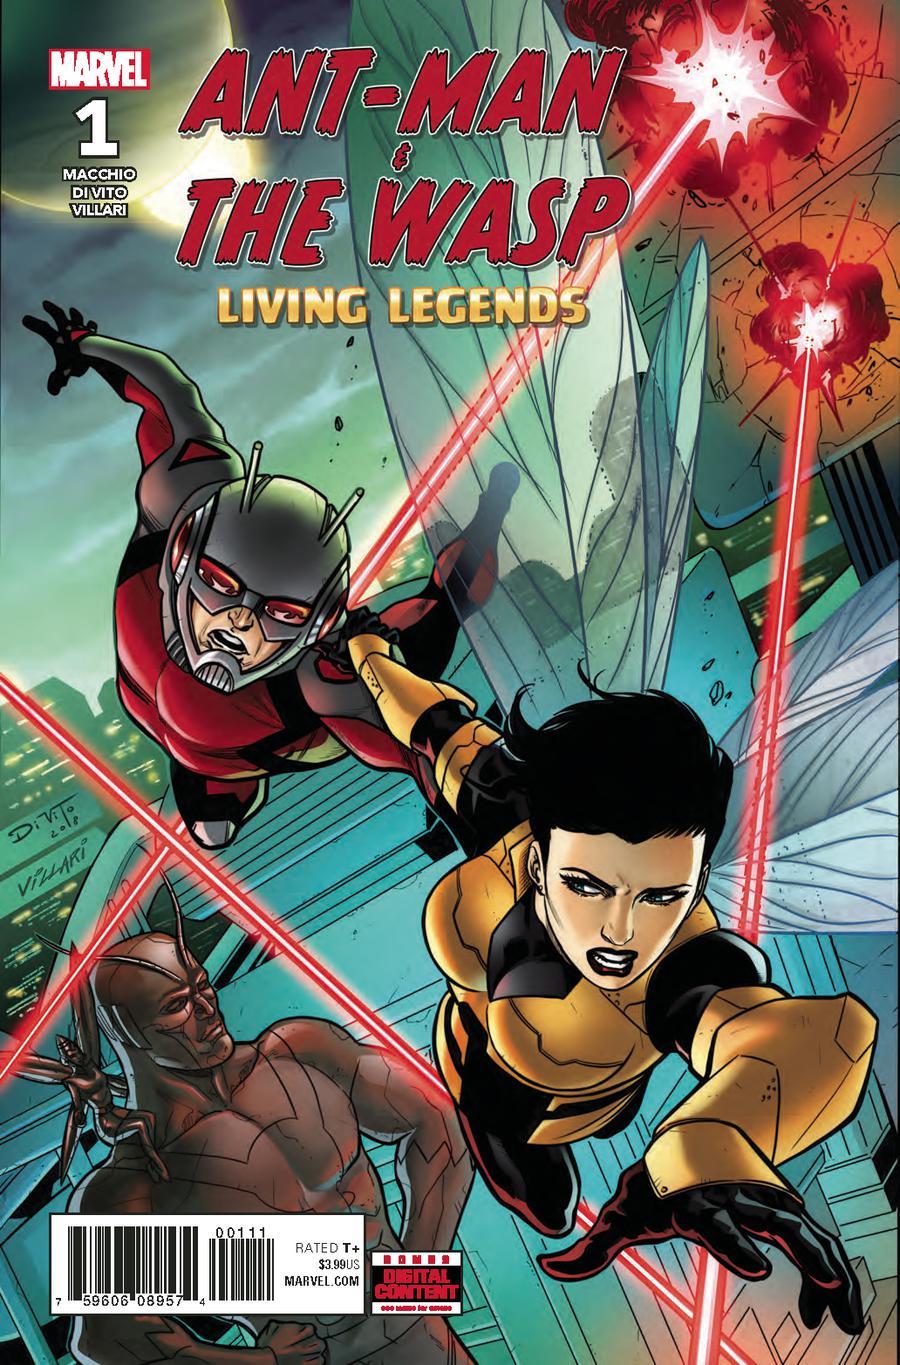 Ant-Man And The Wasp Living Legends Vol. 1 #1